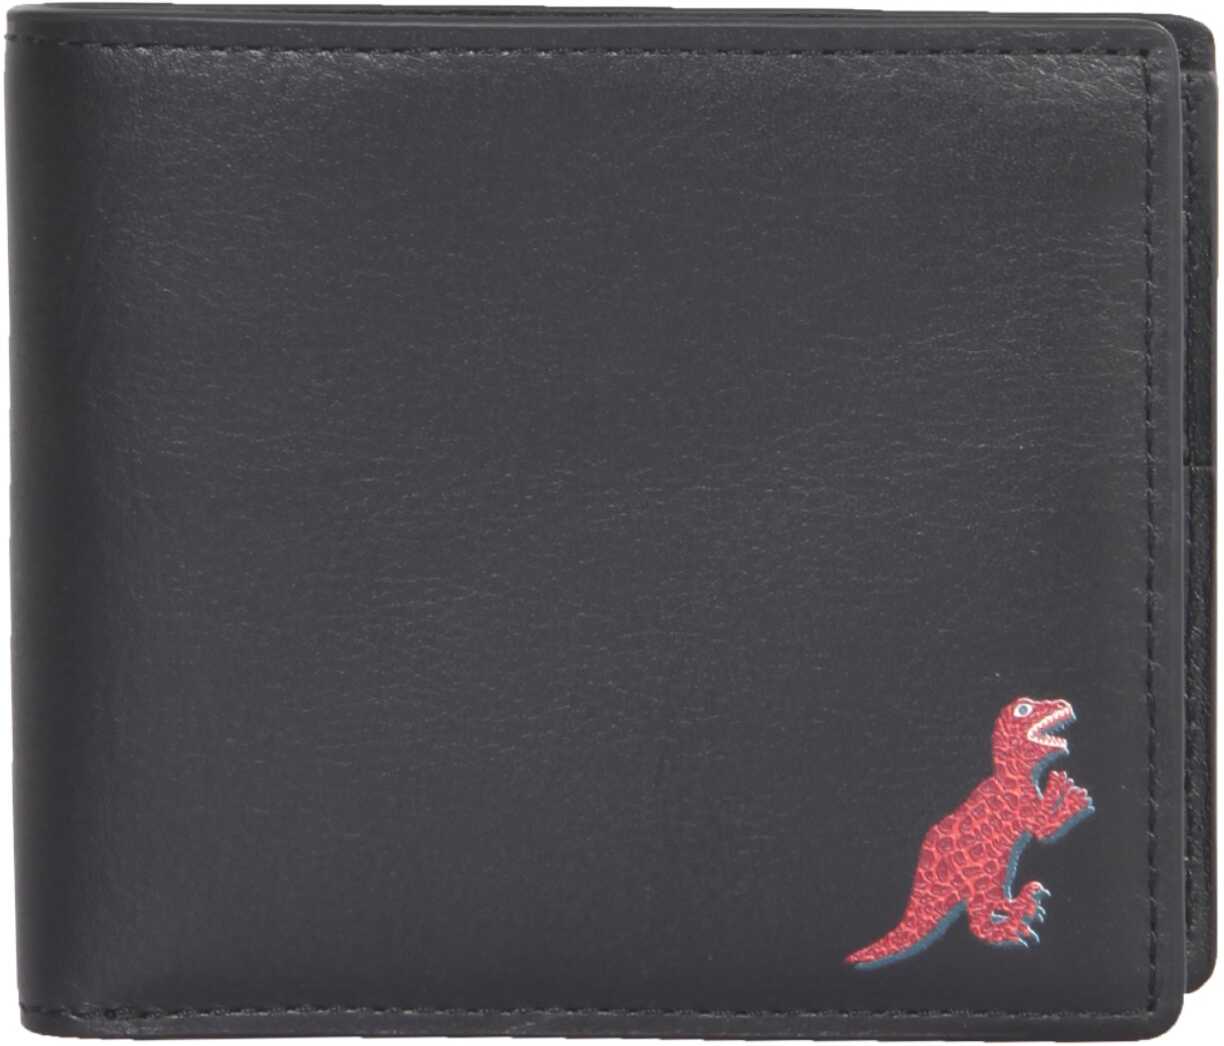 PS by Paul Smith Leather Bifold Wallet M2A/5321/GDINO_79 BLACK